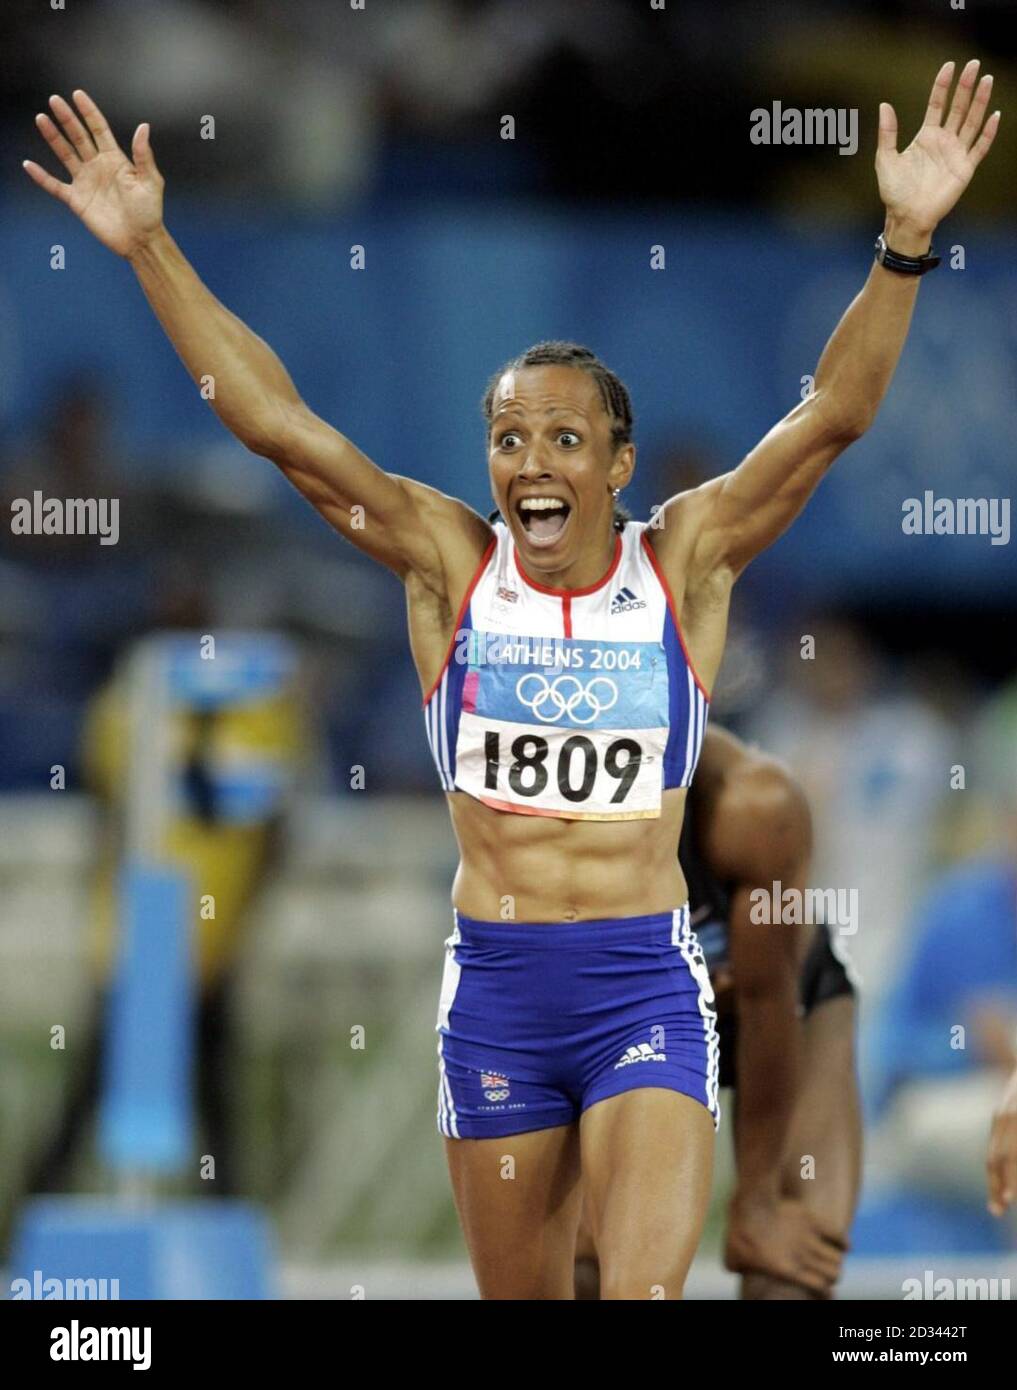 Great Britain's gold medal winner Kelly Holmes celebrates after winning the Women's 800m at the Olympic Stadium during the Olympic Games in Athens, Greece. Stock Photo